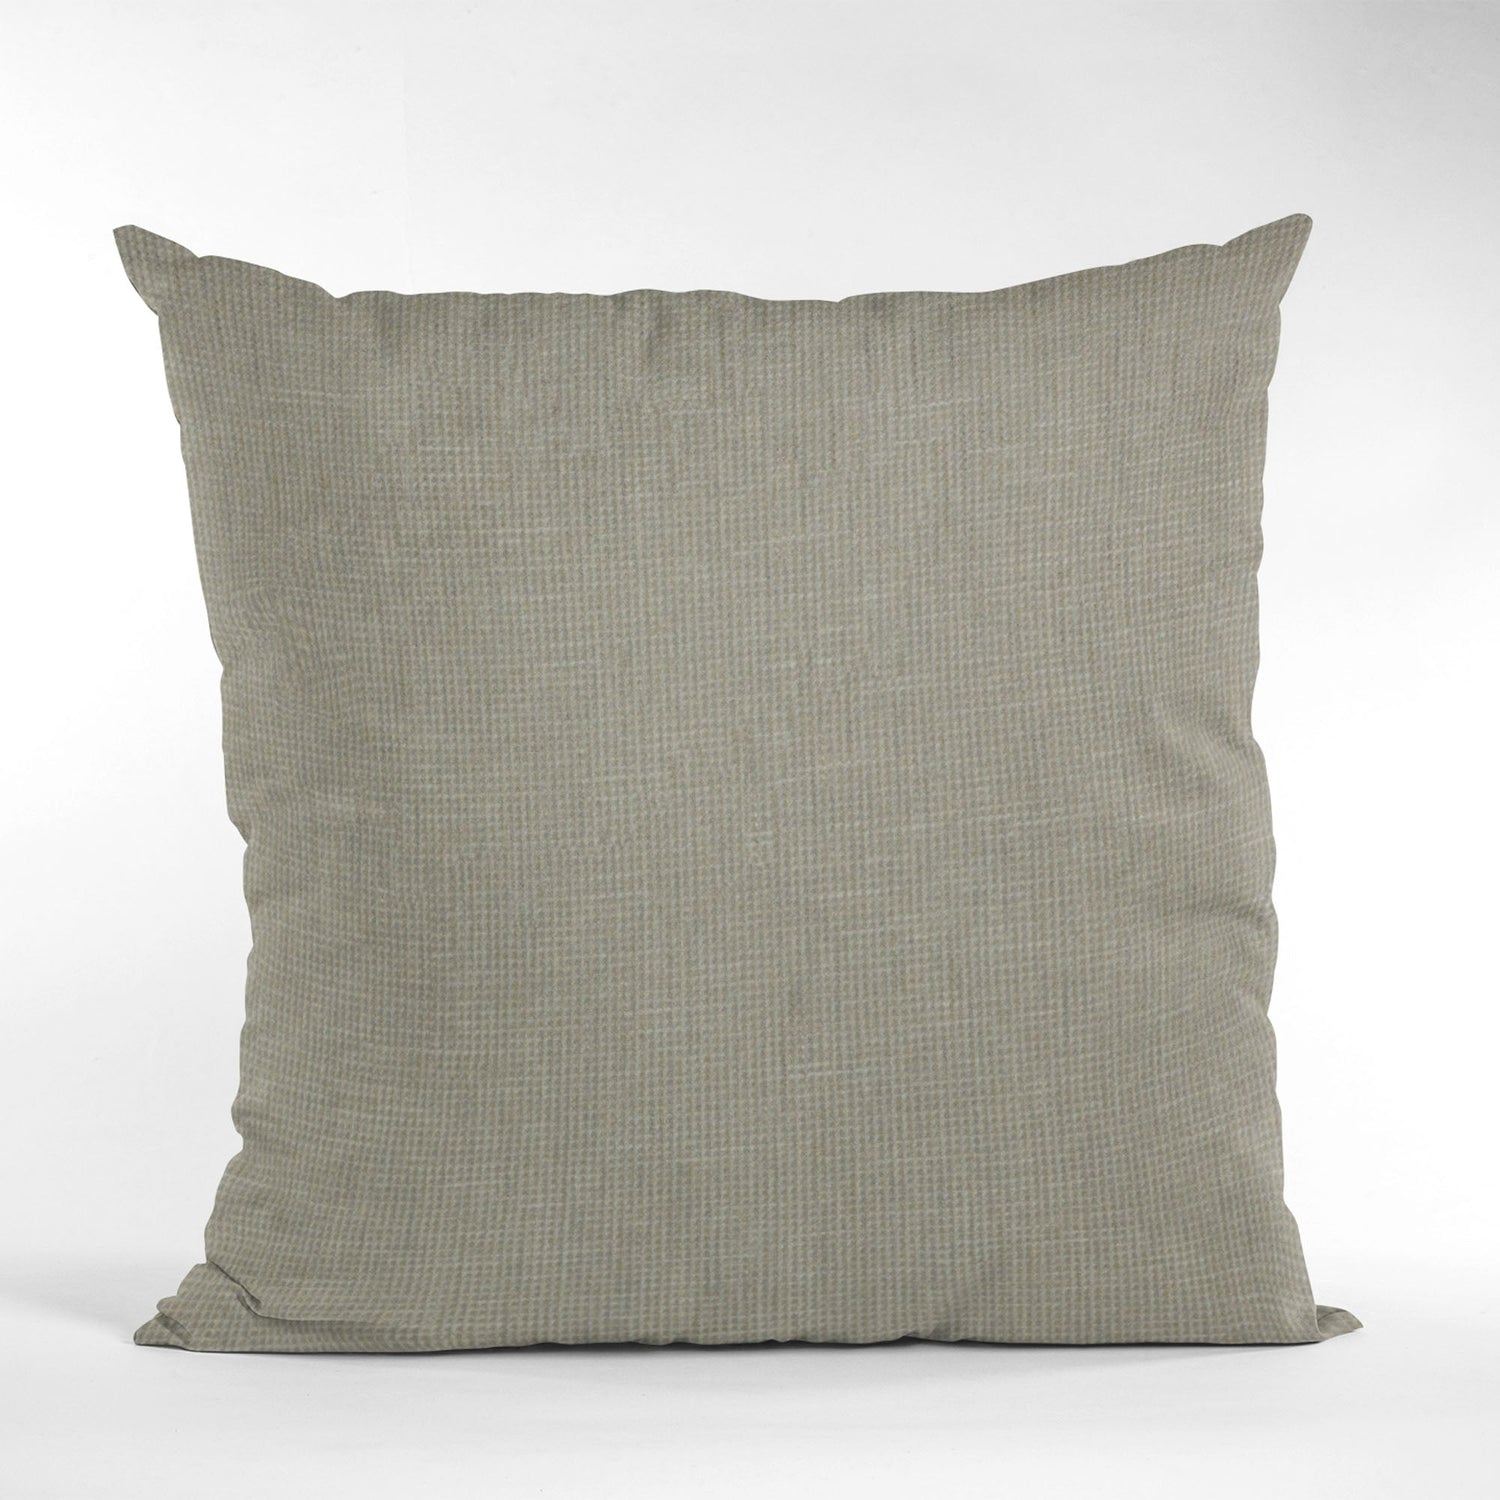 Plutus Travertine Waffle Textured Solid, Sort of a Waffle Texture Luxury Throw Pillow